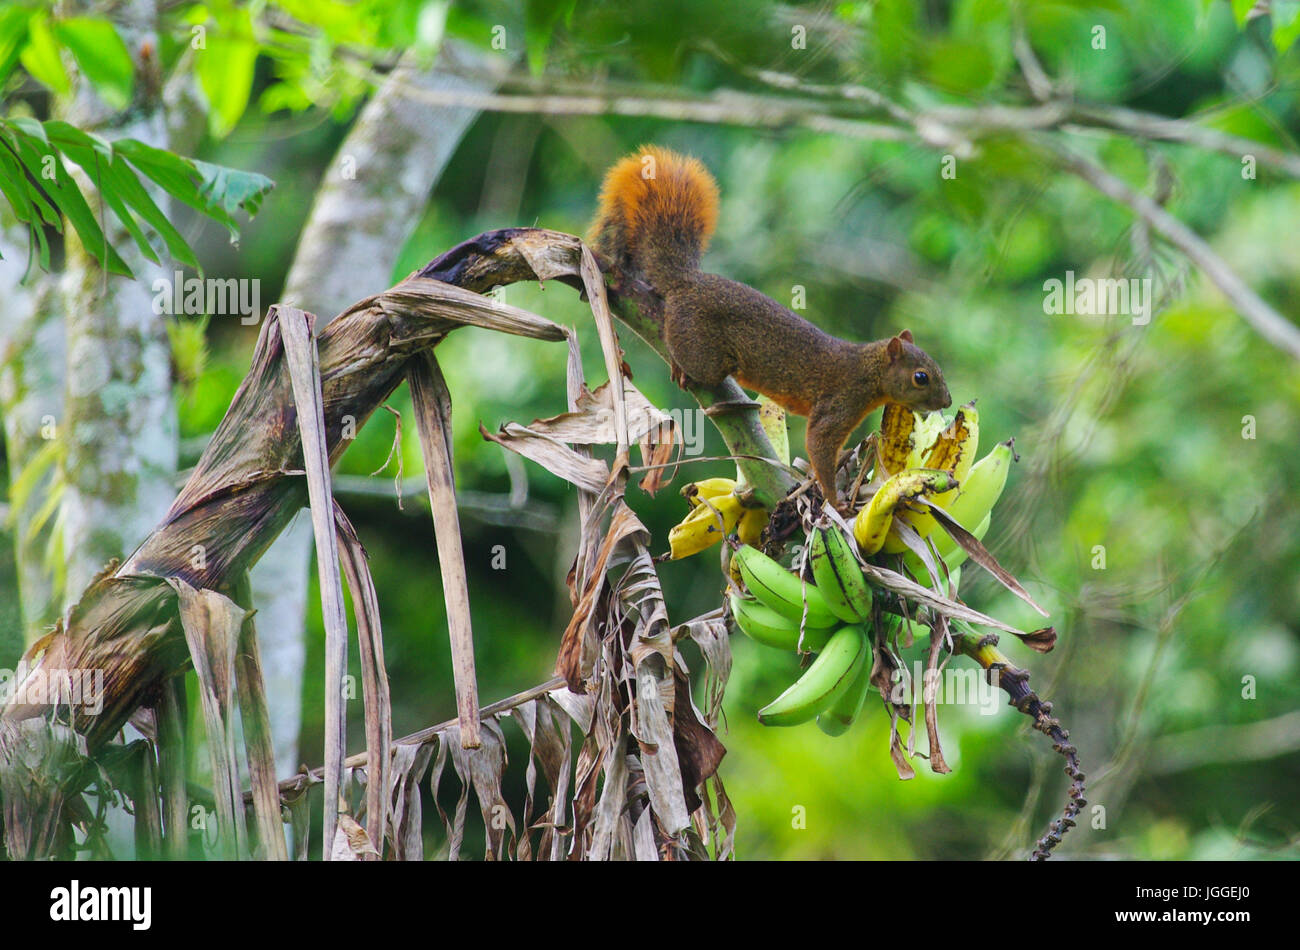 Red tailed squirrel eating bananas Stock Photo